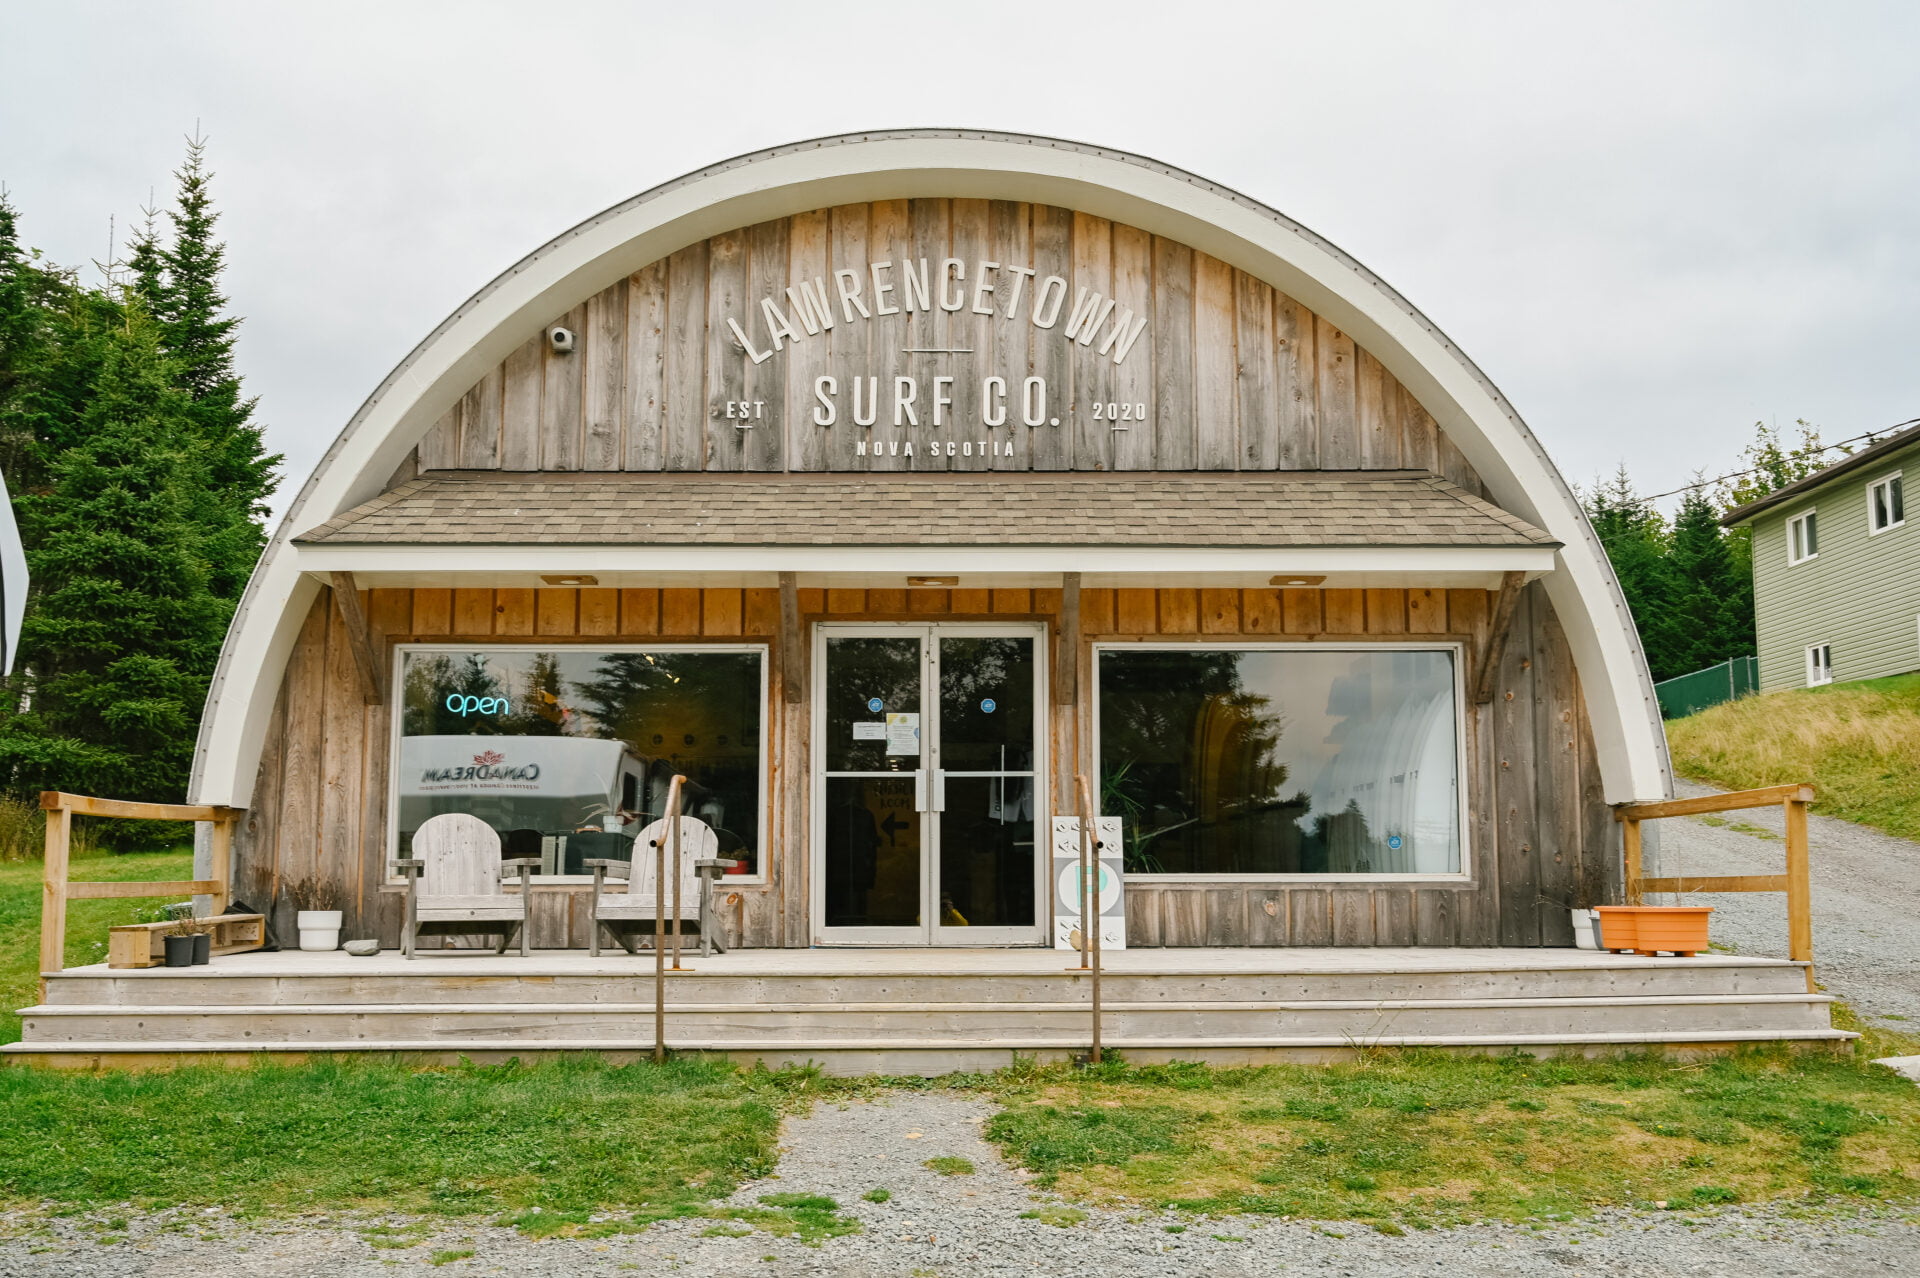 outside view of the lawrencetown surf co. building